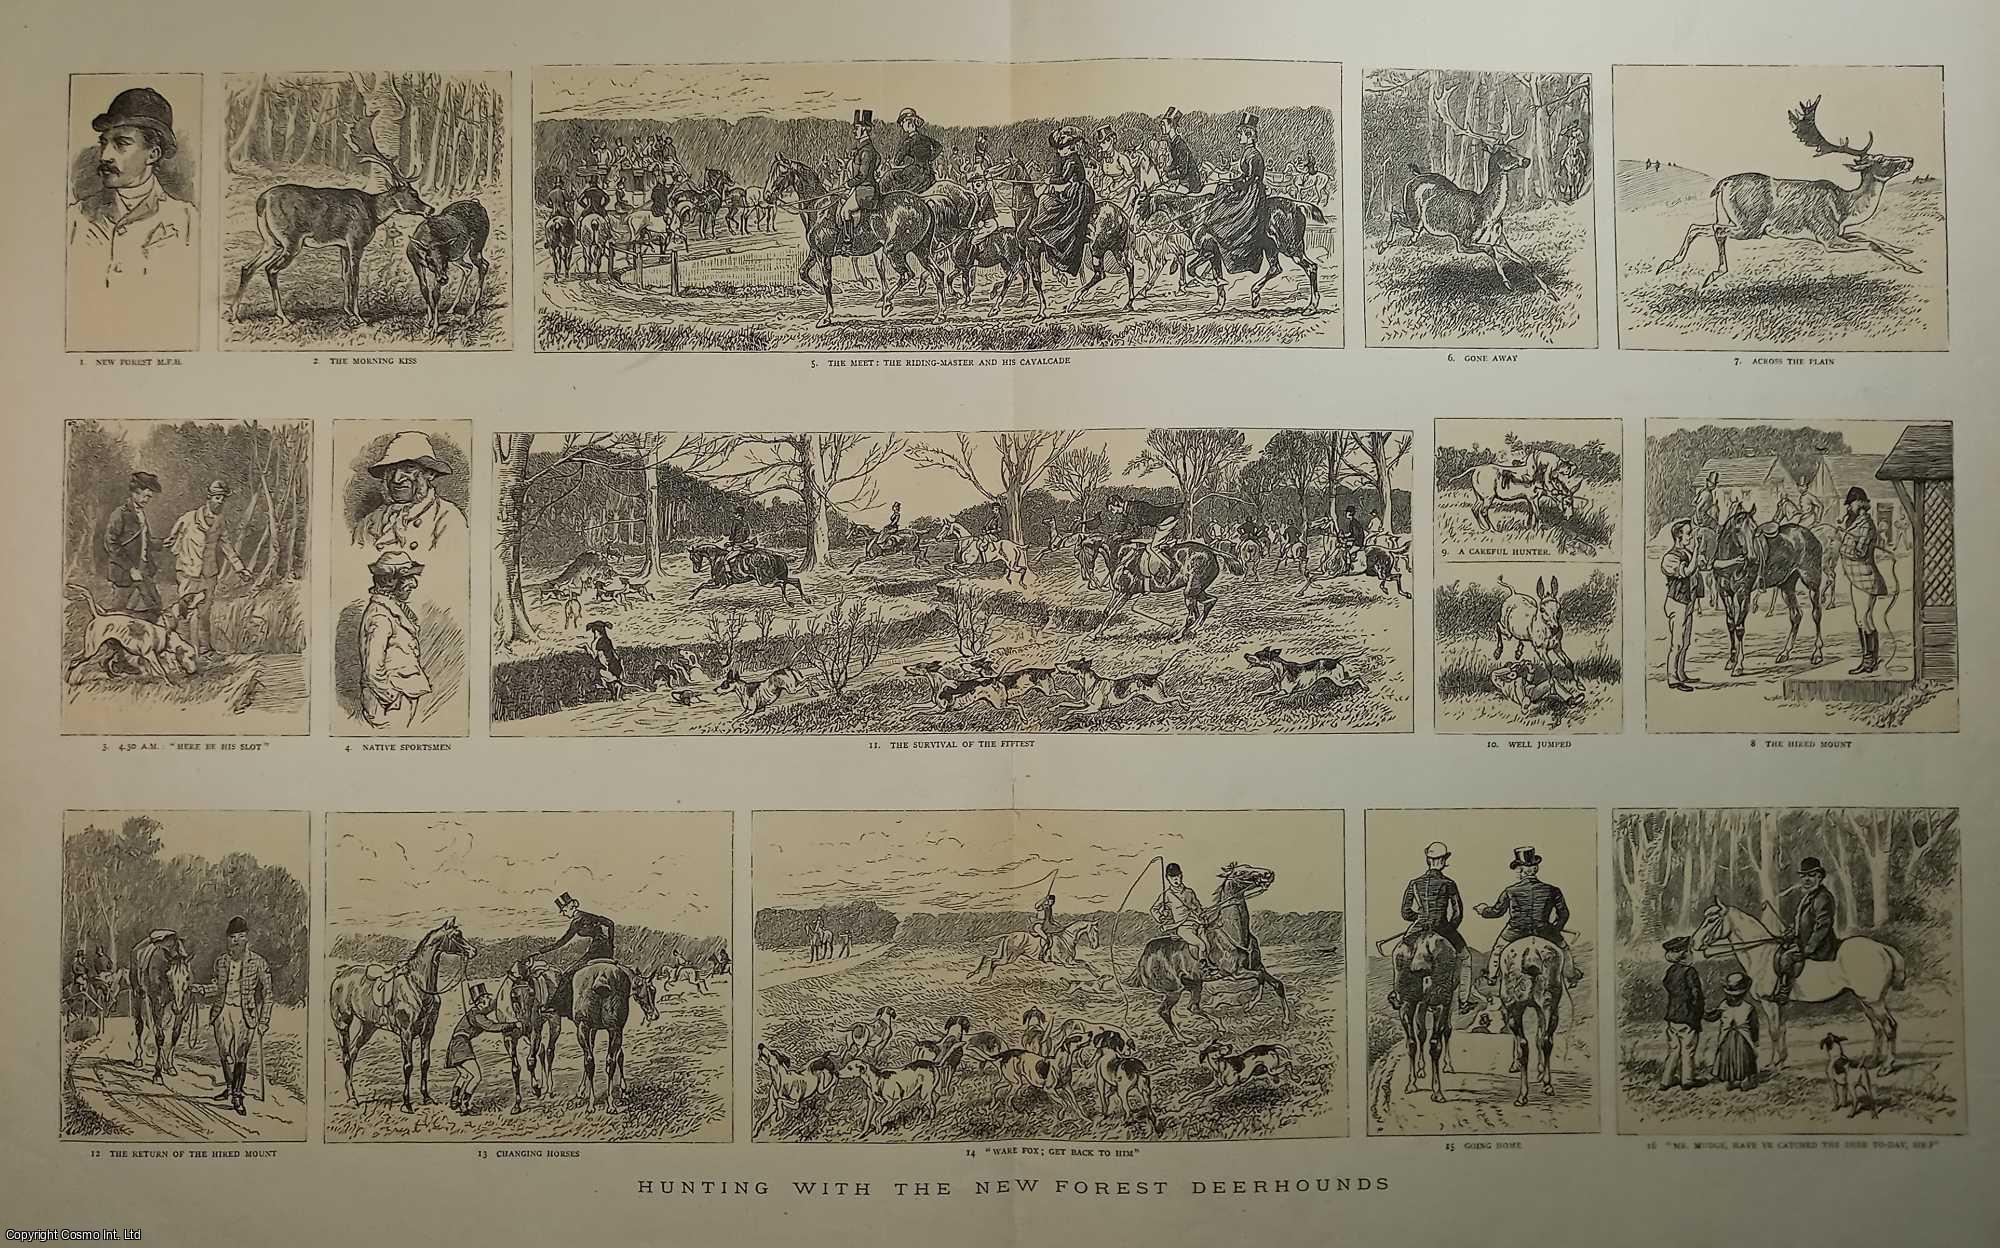 Fox Hunting - Hunting with the New Forest Deerhounds. A series of 16 vignettes illustrating various hunting scenes. An original print from the Graphic Illustrated Weekly Magazine, 1885.